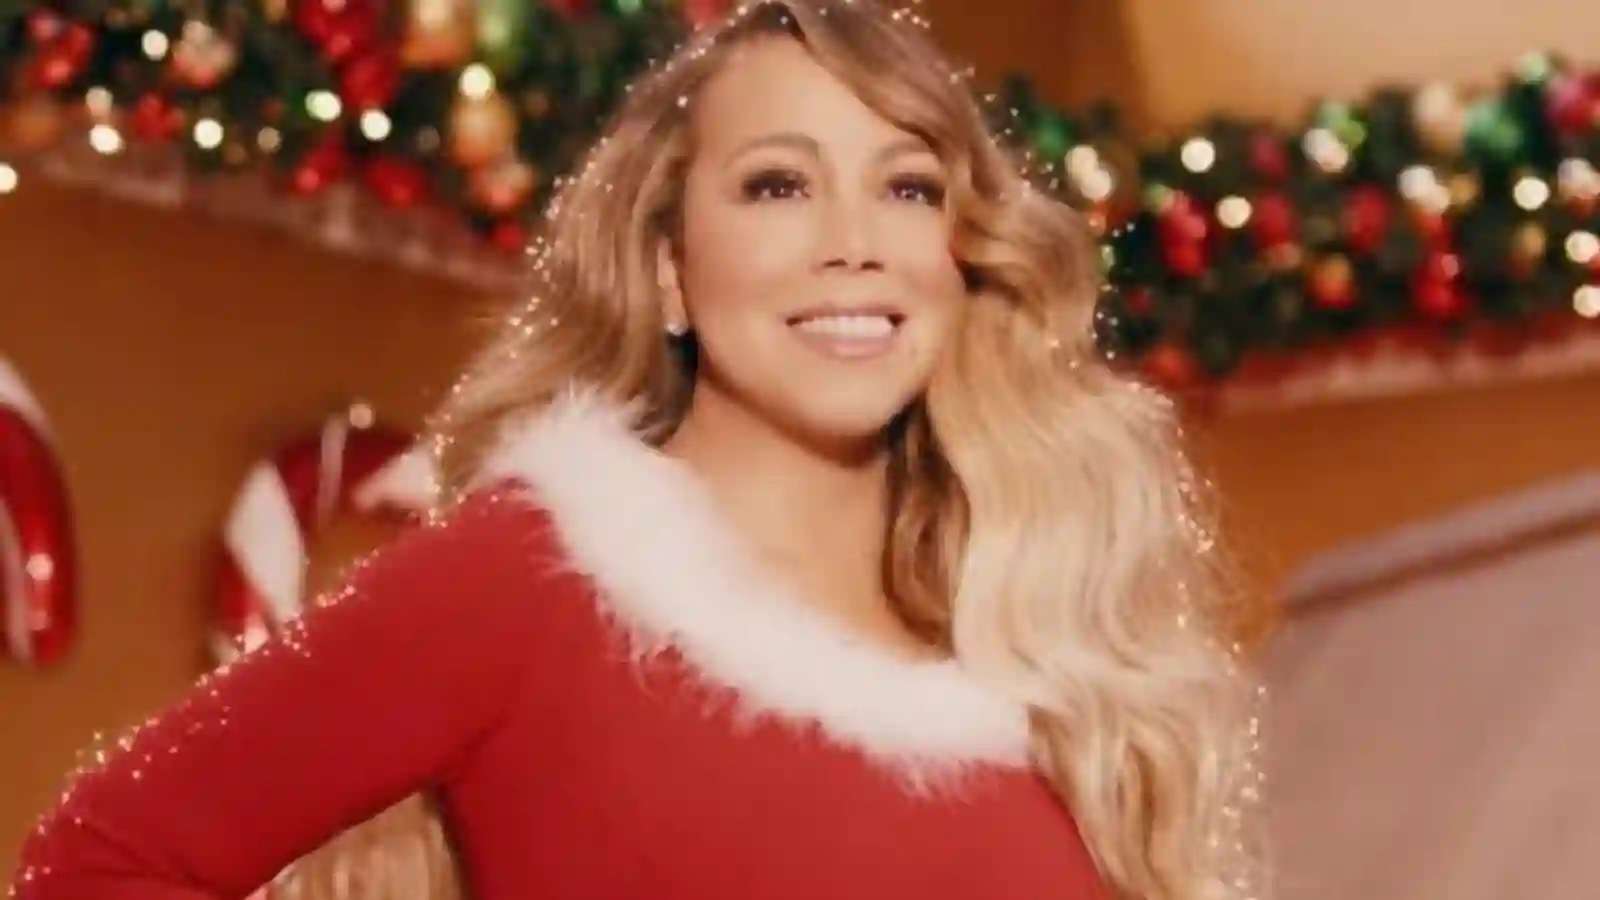  Mariah Carey in 'All I Want For Christmas Is You' by Mariah Carey